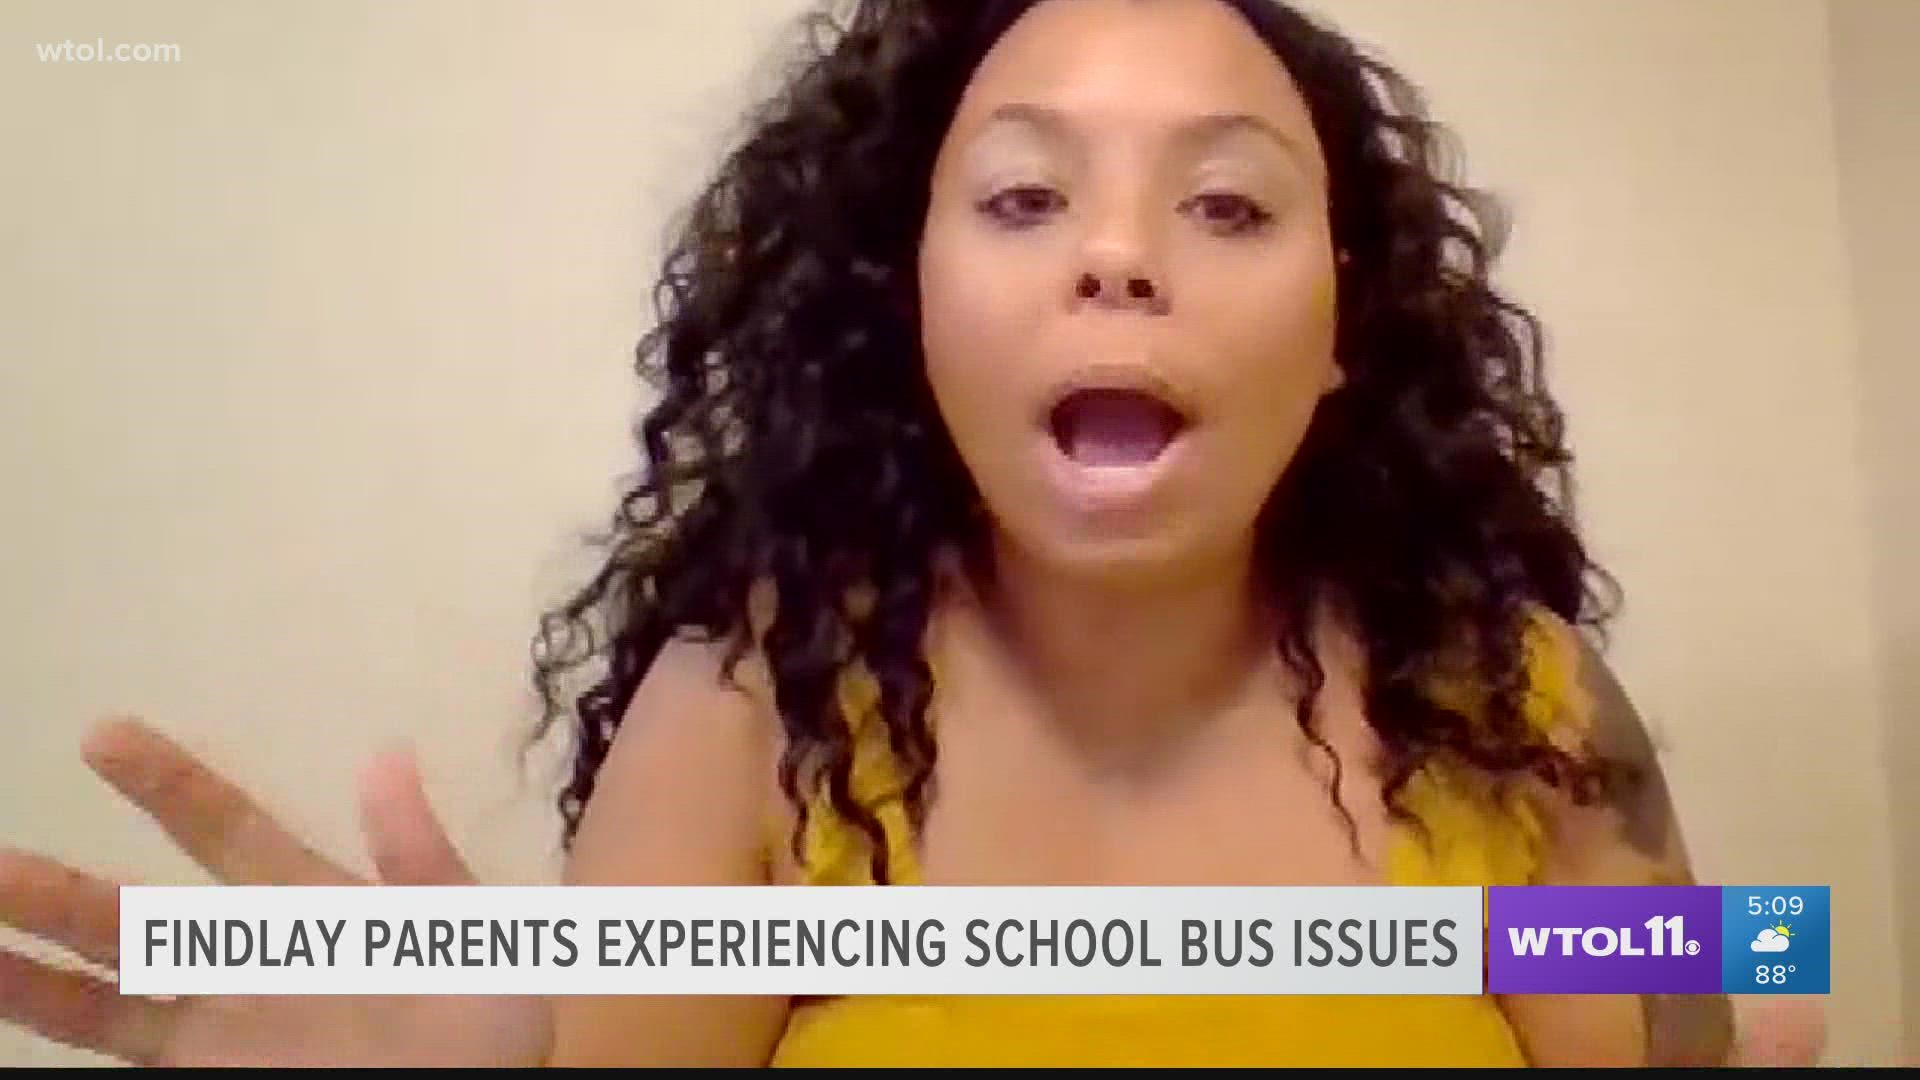 Some parents describe missed connections and kids not arriving home for hours after school. The district has apologized to parents for the problems.